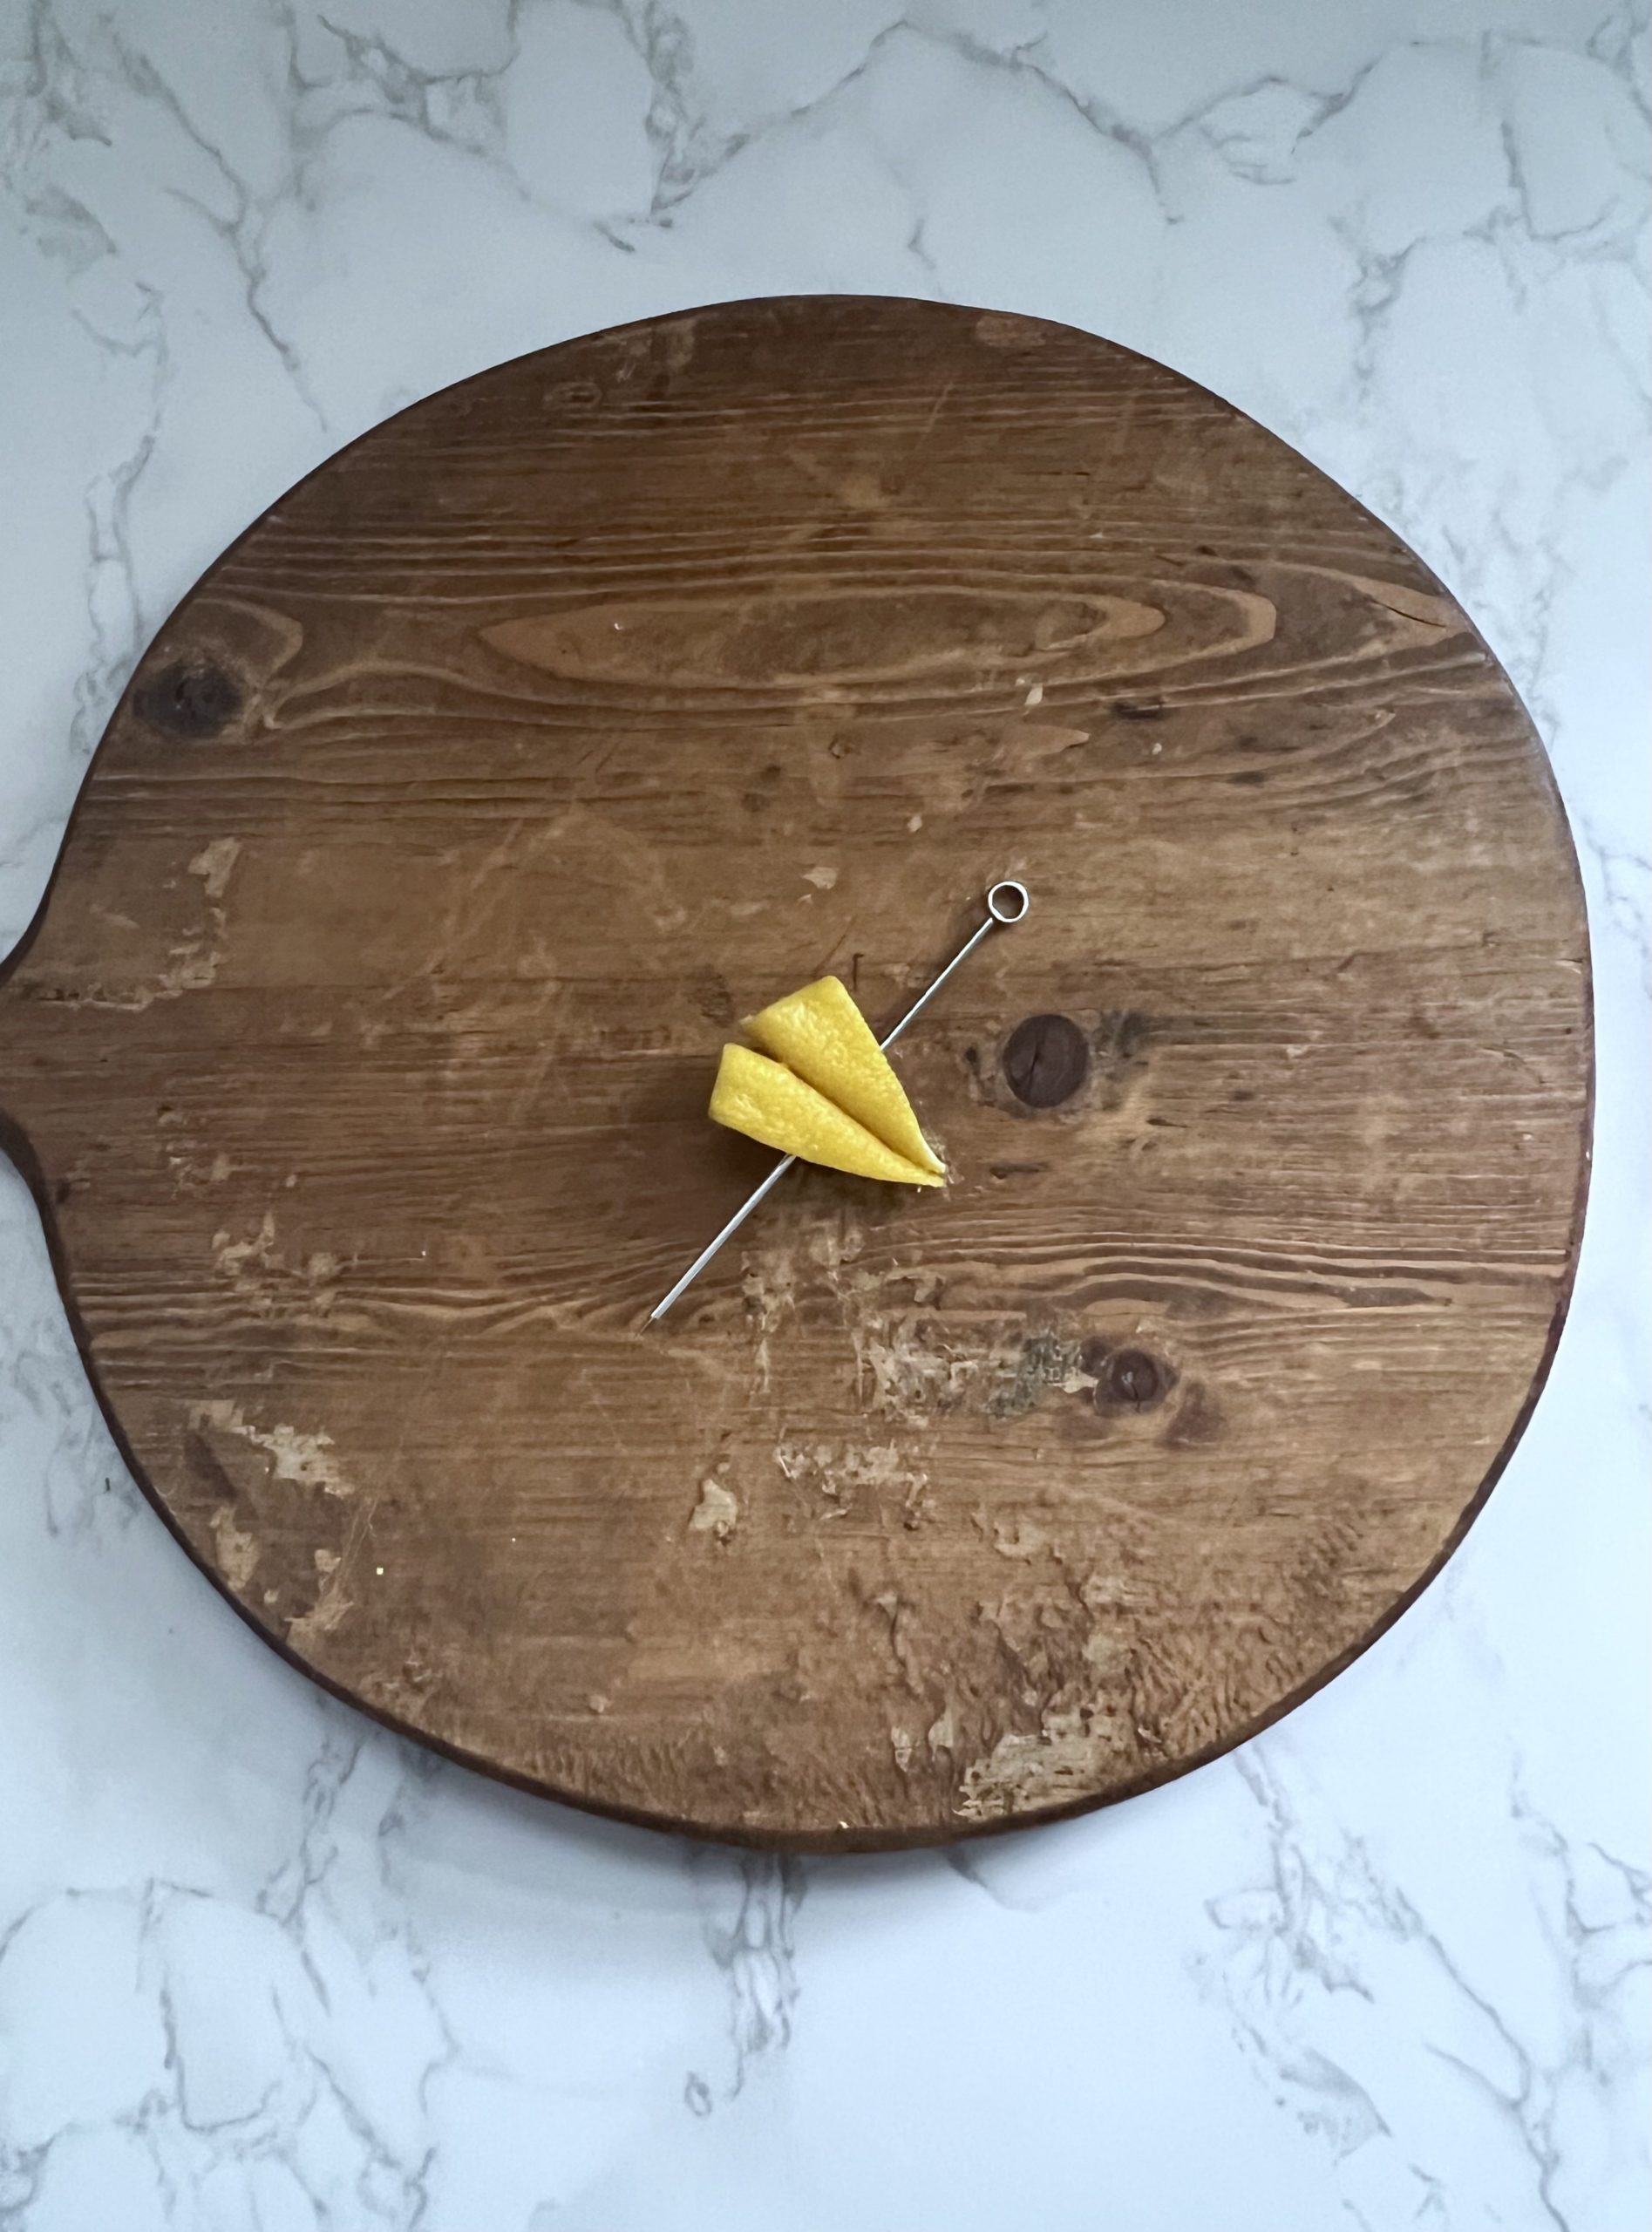 A paper plane made out of a lemon peel with a cocktail pick through it on a cutting board.